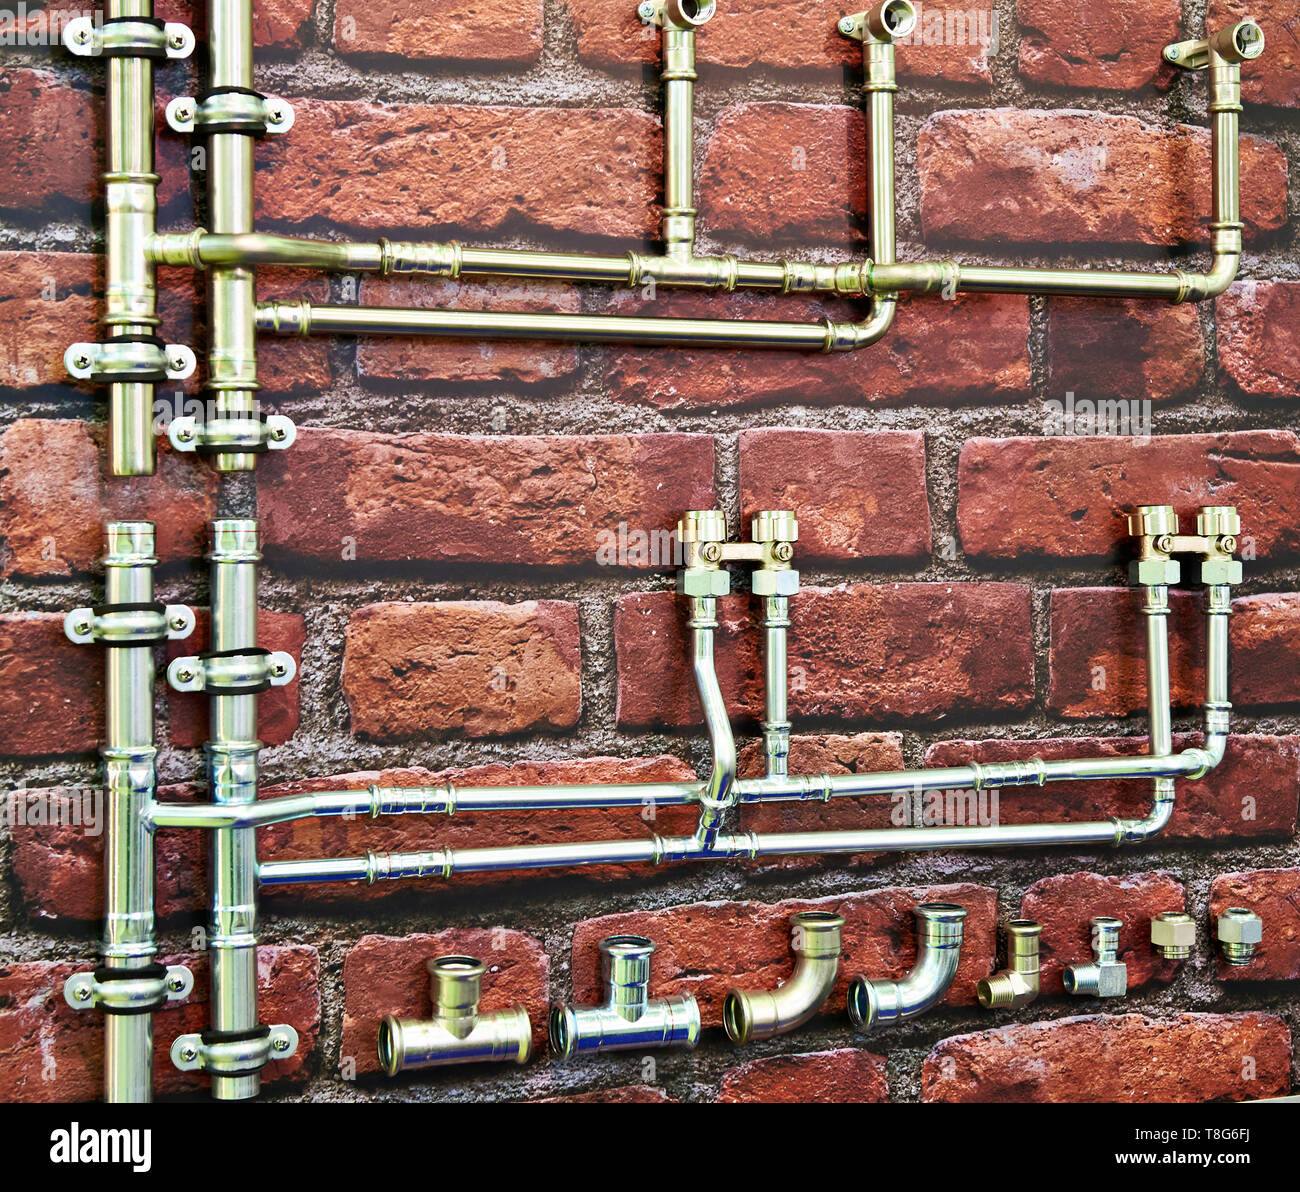 Metal plumbing pipes on a brick wall Stock Photo